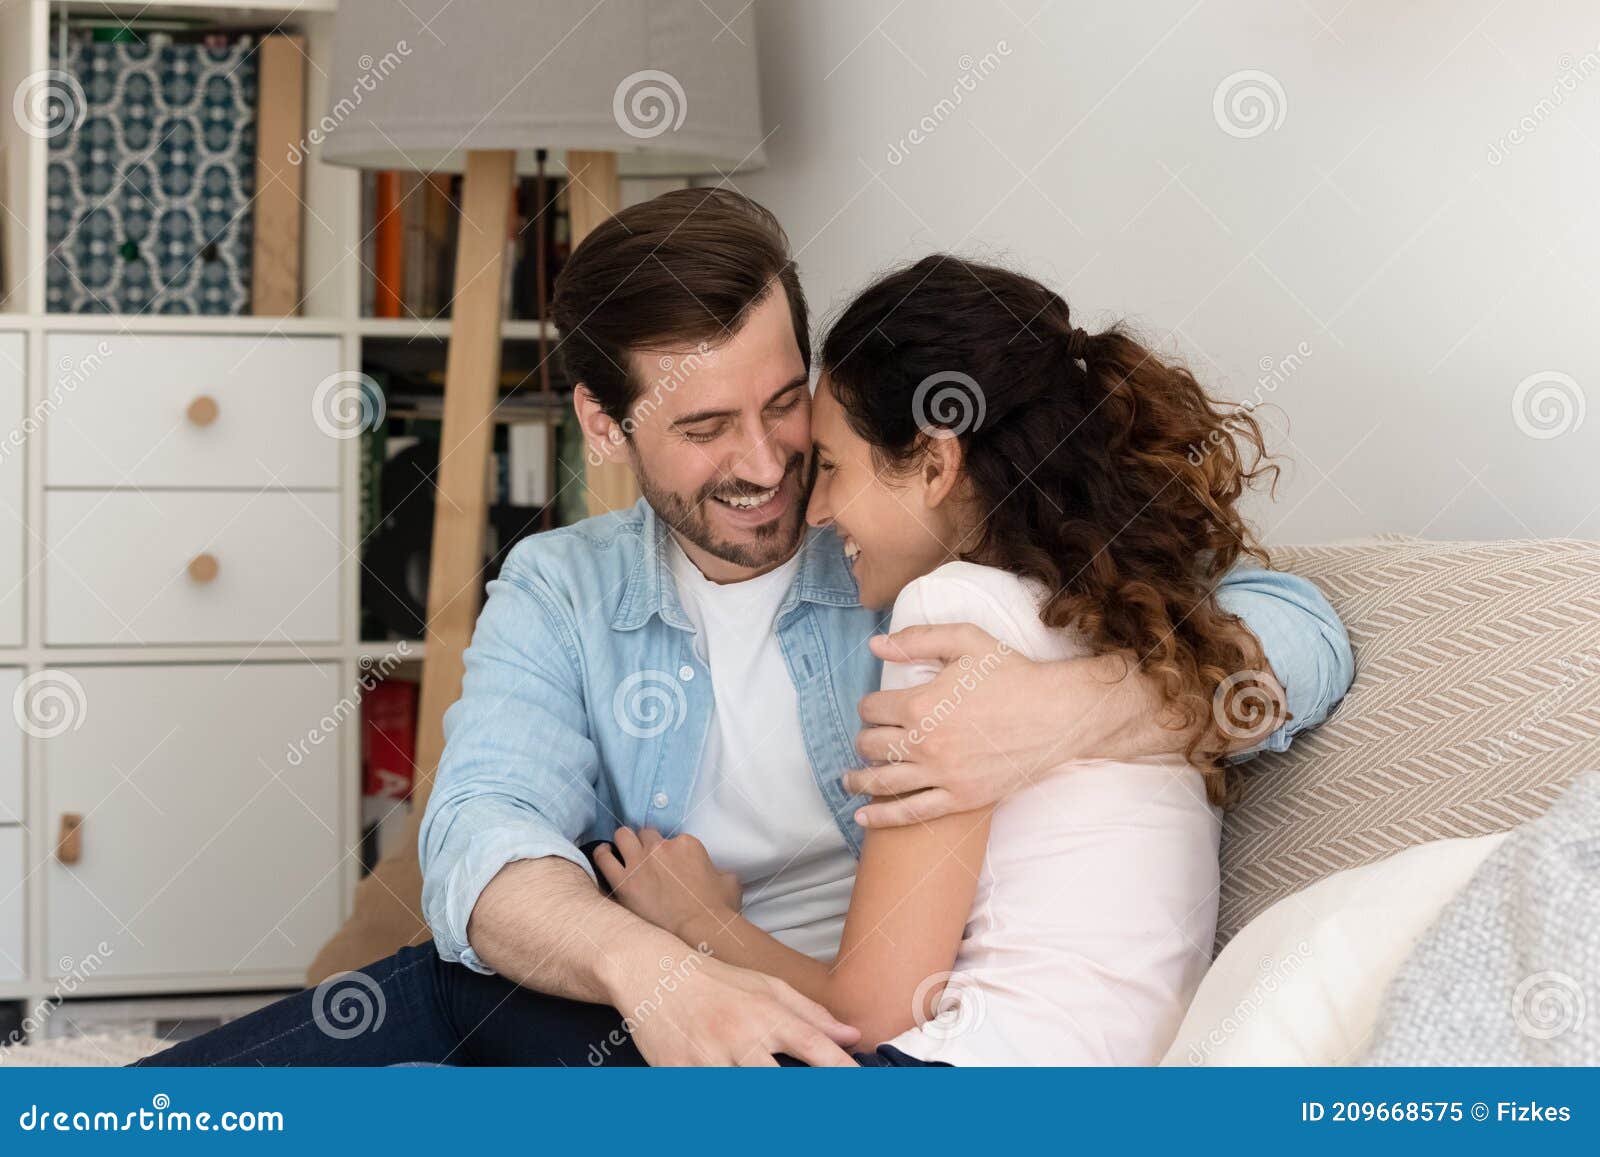 young couple house buyers cuddle on couch enjoy new home